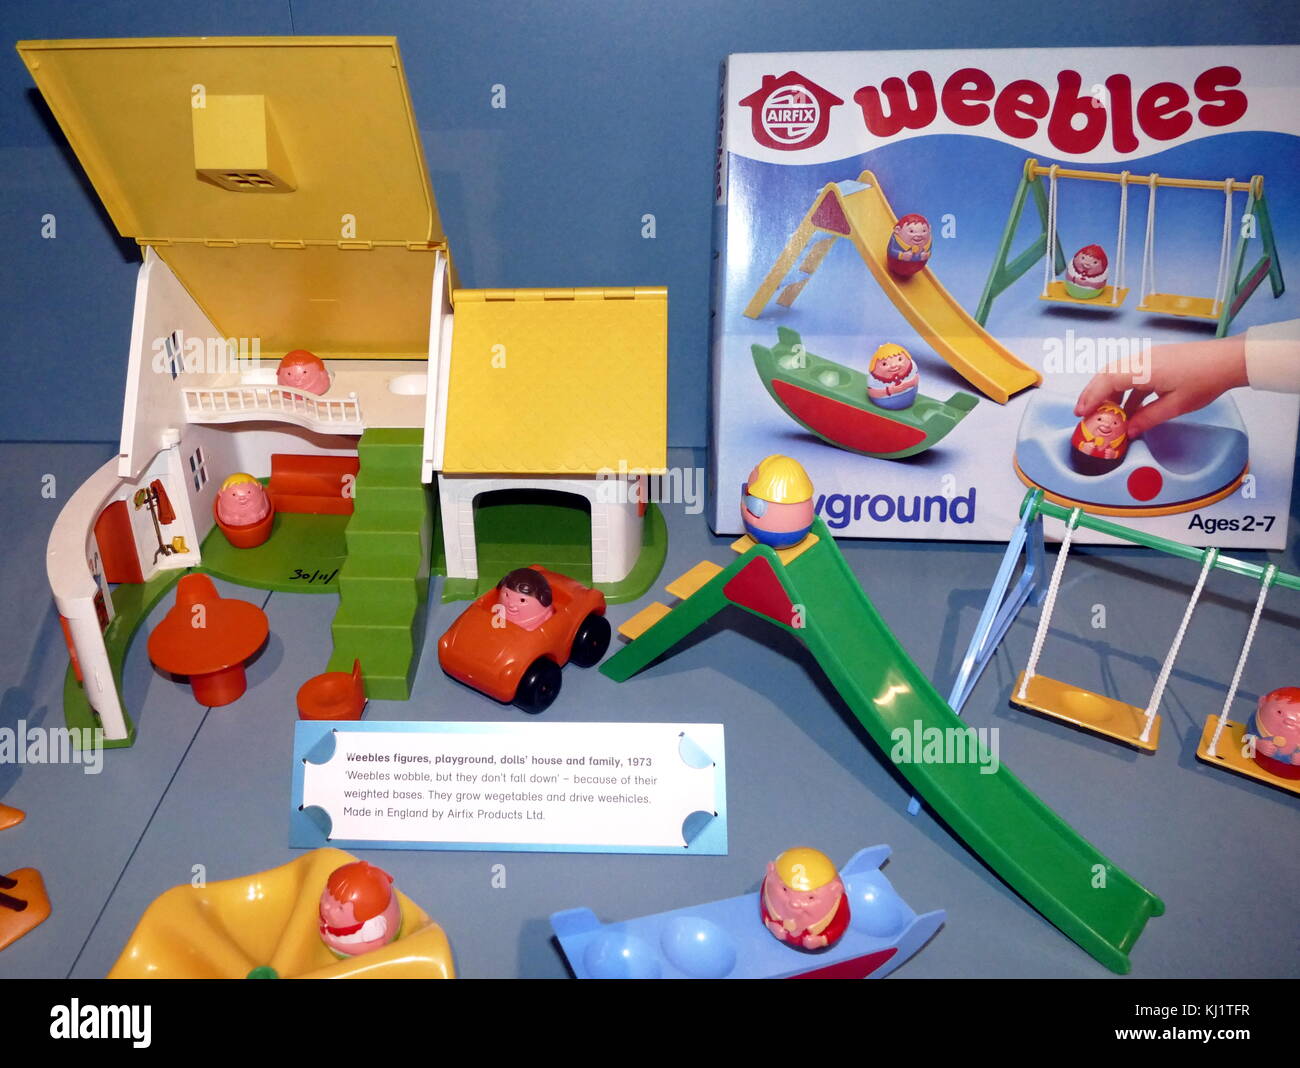 Weebles plastic dolls house and figures 1973 Stock Photo